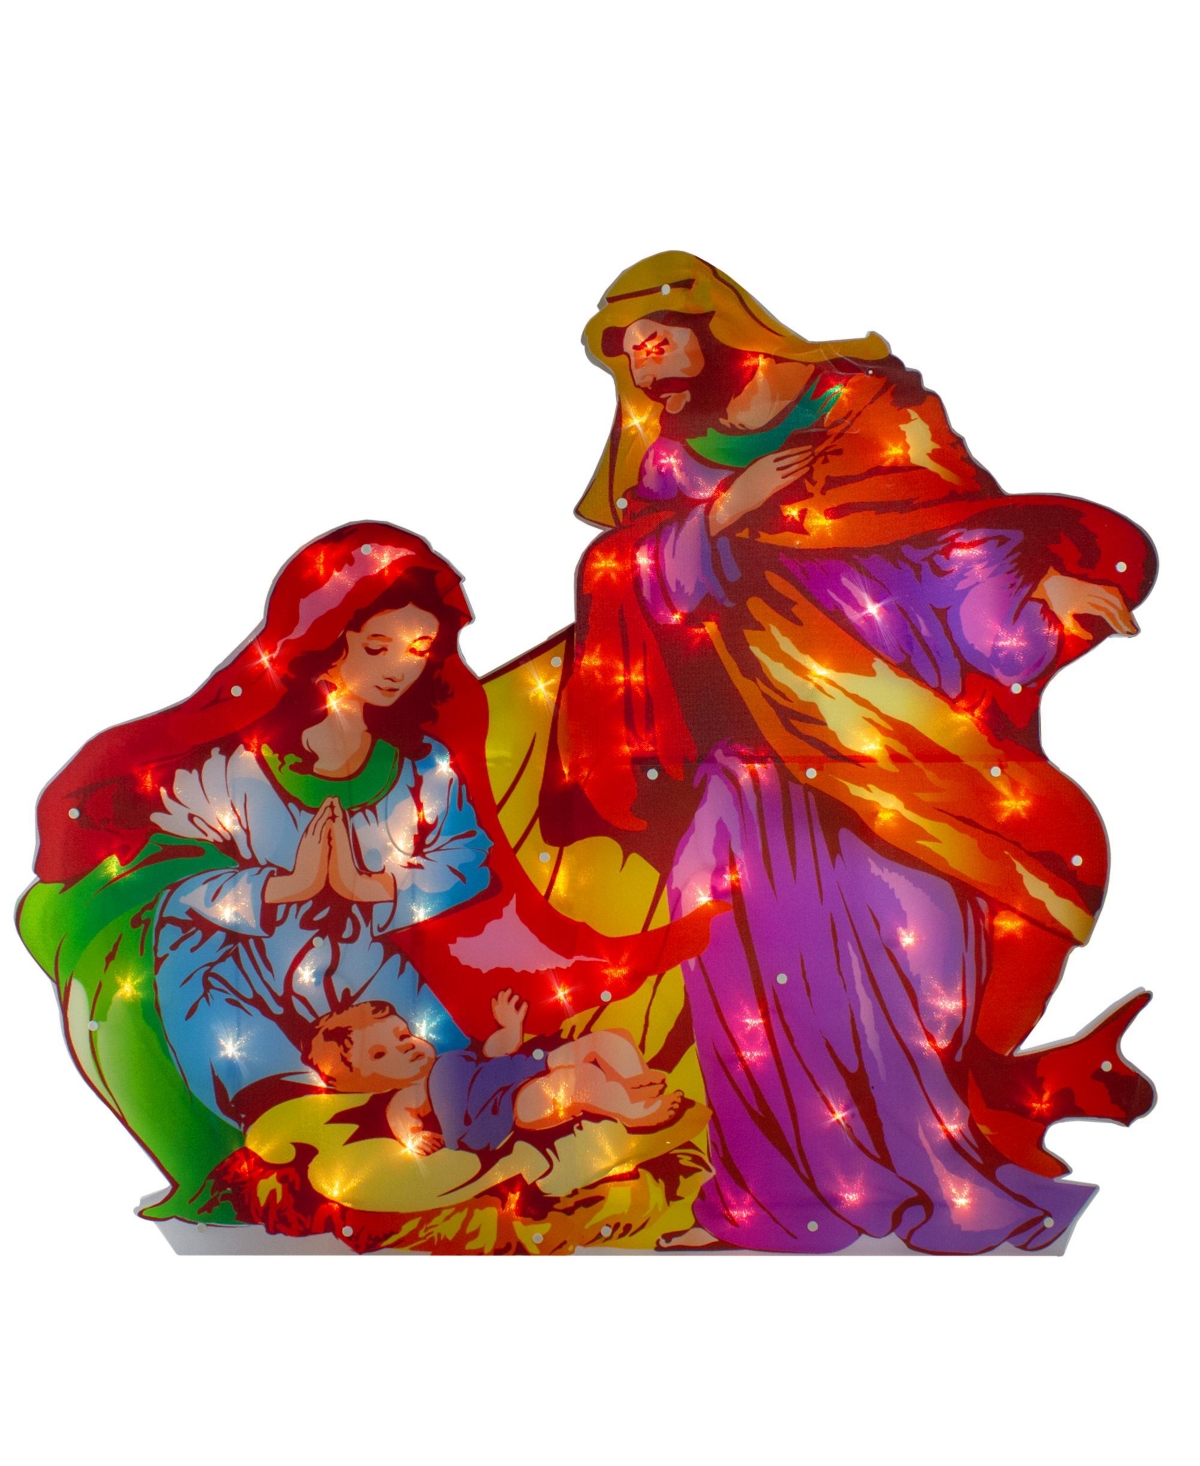 Northlight Lighted Holy Family Nativity Scene Christmas Outdoor Decoration, 38" In Red